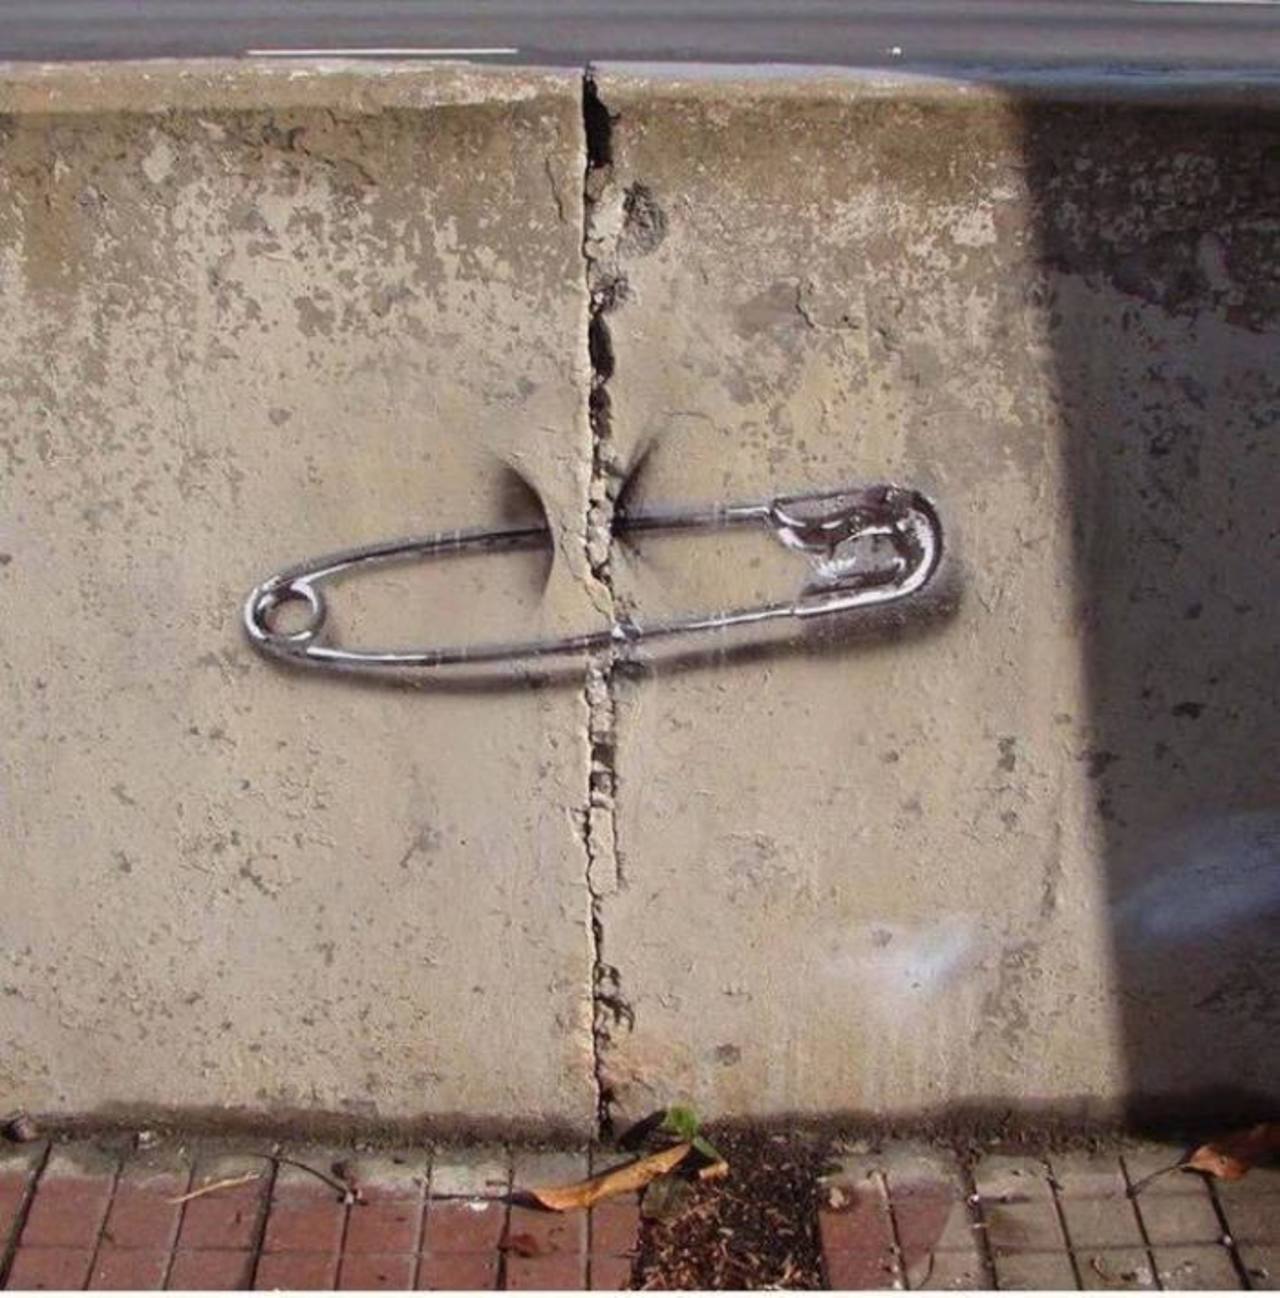 Simple & Beauty – #Creative #Streetart | Be ▲rtist - Be ▲rt https://beartistbeart.com/2016/08/25/simple-beauty-creative-streetart/?utm_campaign=crowdfire&utm_content=crowdfire&utm_medium=social&utm_source=twitter https://t.co/fJal6CP89A